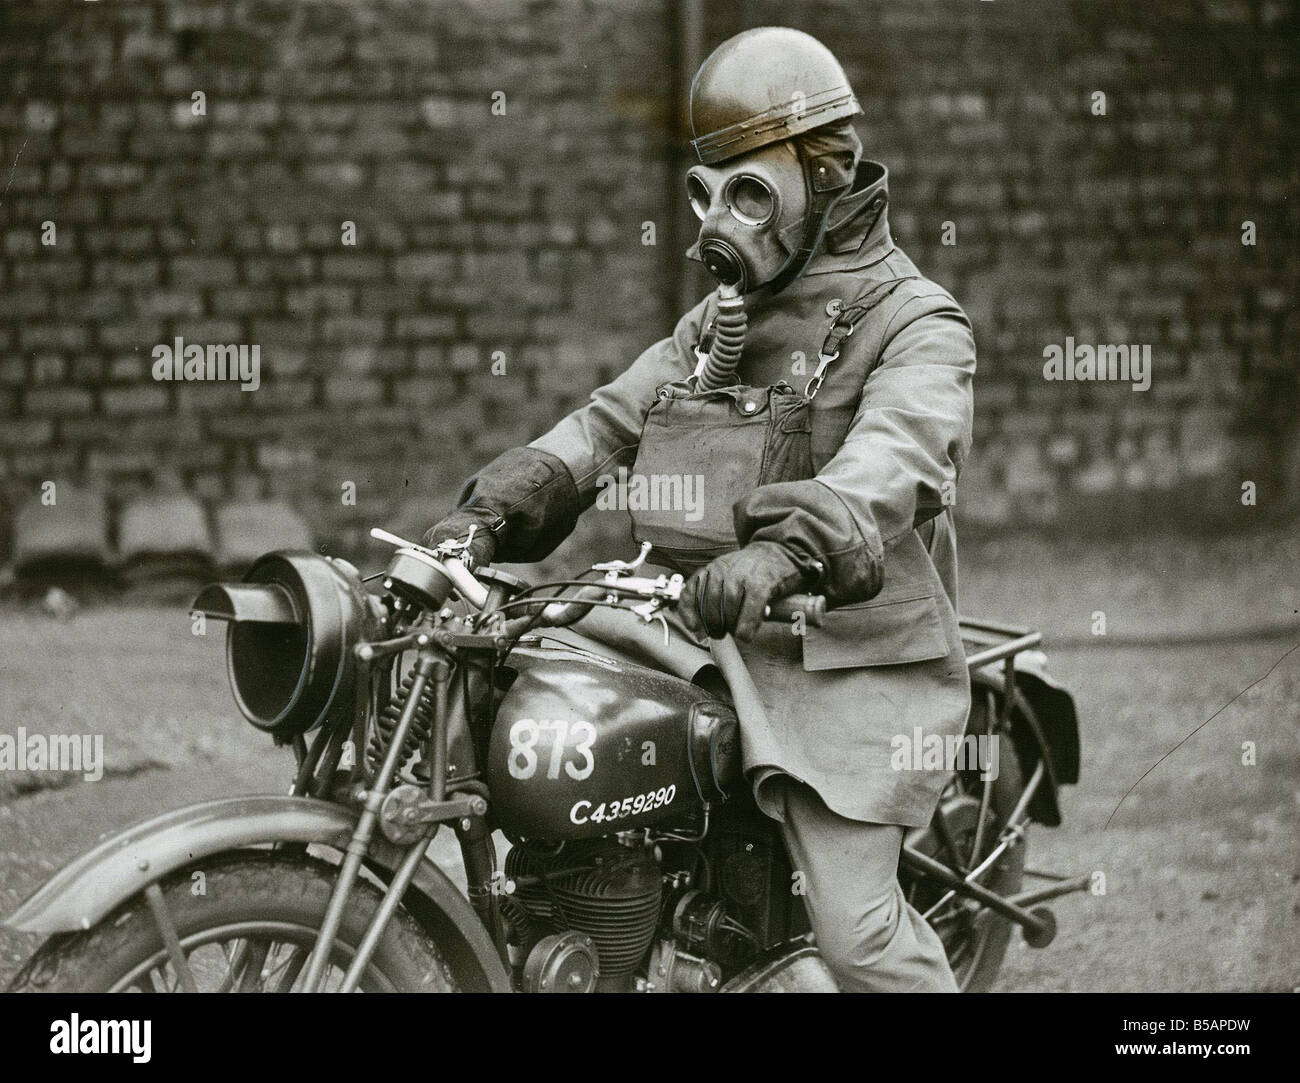 Army Despatch Rider August 1941 Riding motorbike wearing gas mask Stock  Photo - Alamy